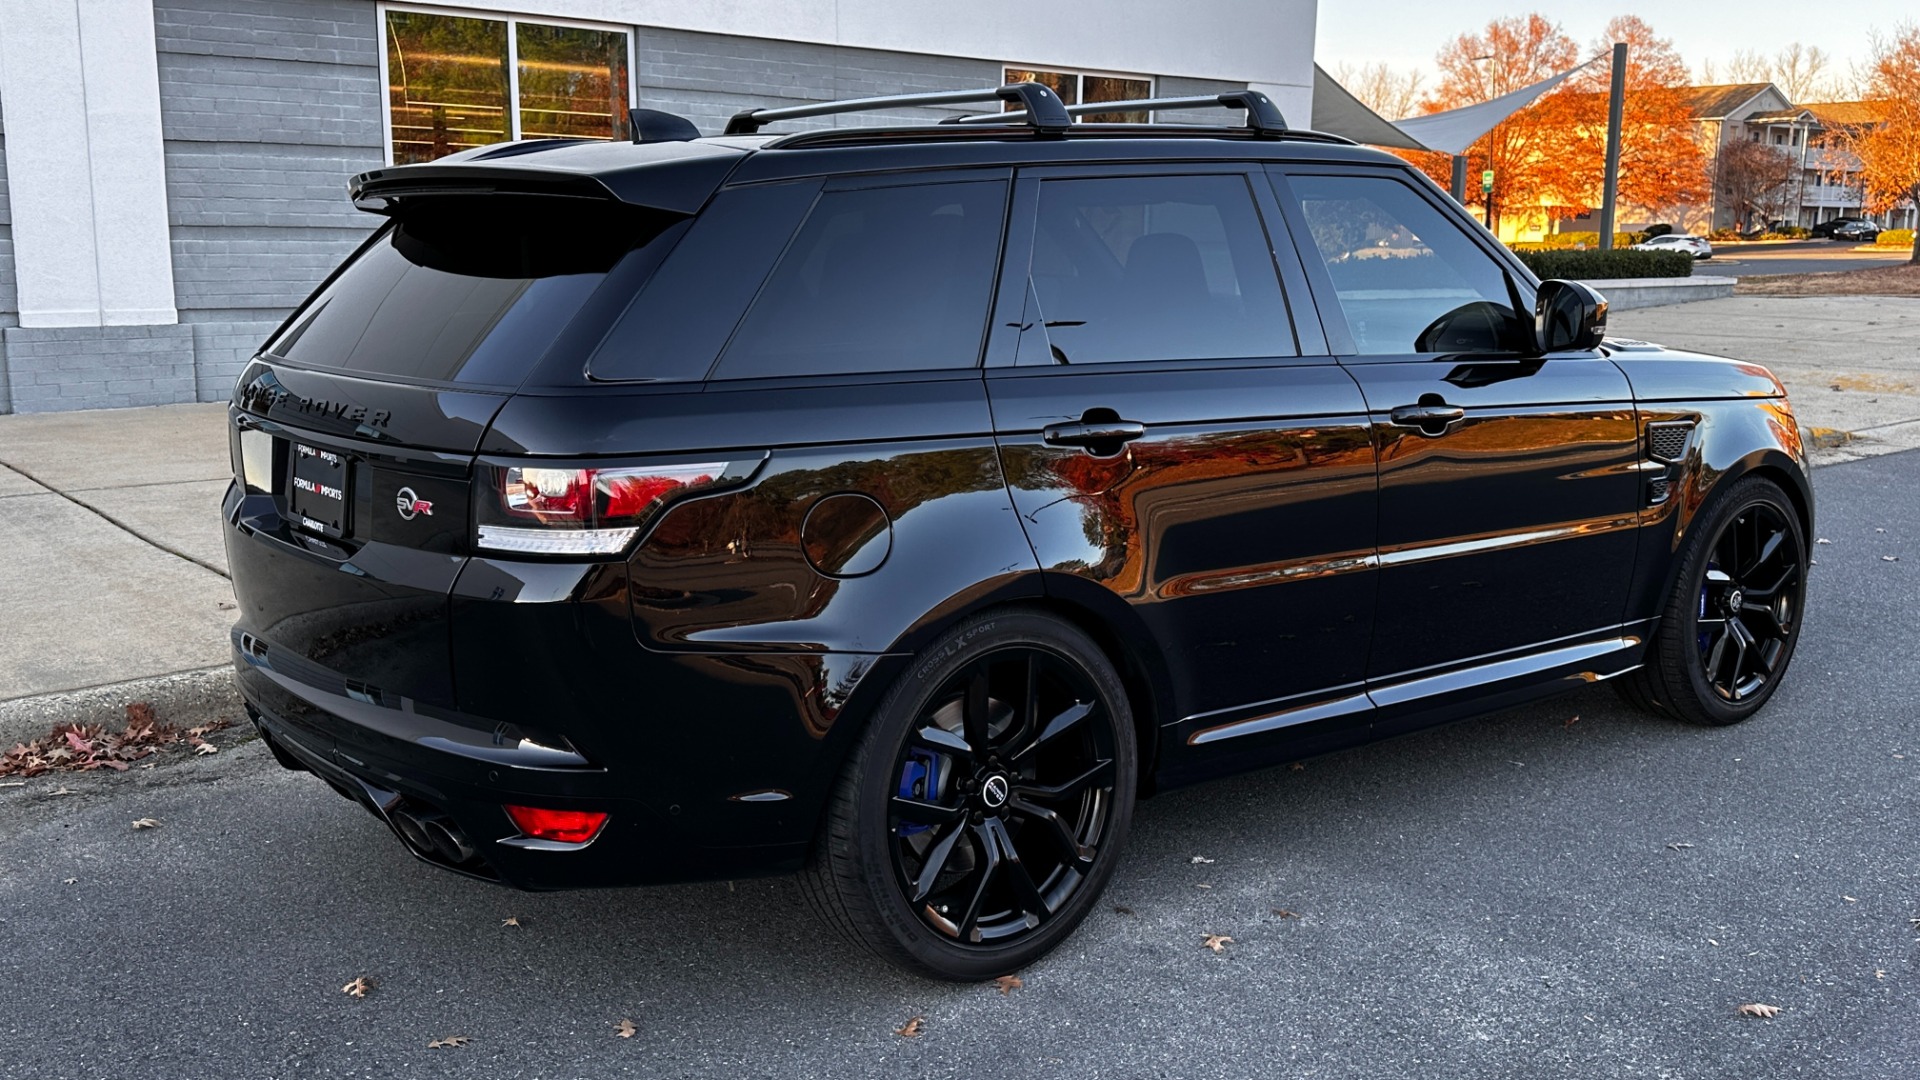 Used 2017 Land Rover Range Rover Sport SVR / DRIVE PRO PACKAGE / MERIDIAN SURROUND SOUND / SUPERCHARGED V8 / PANOR for sale Sold at Formula Imports in Charlotte NC 28227 3